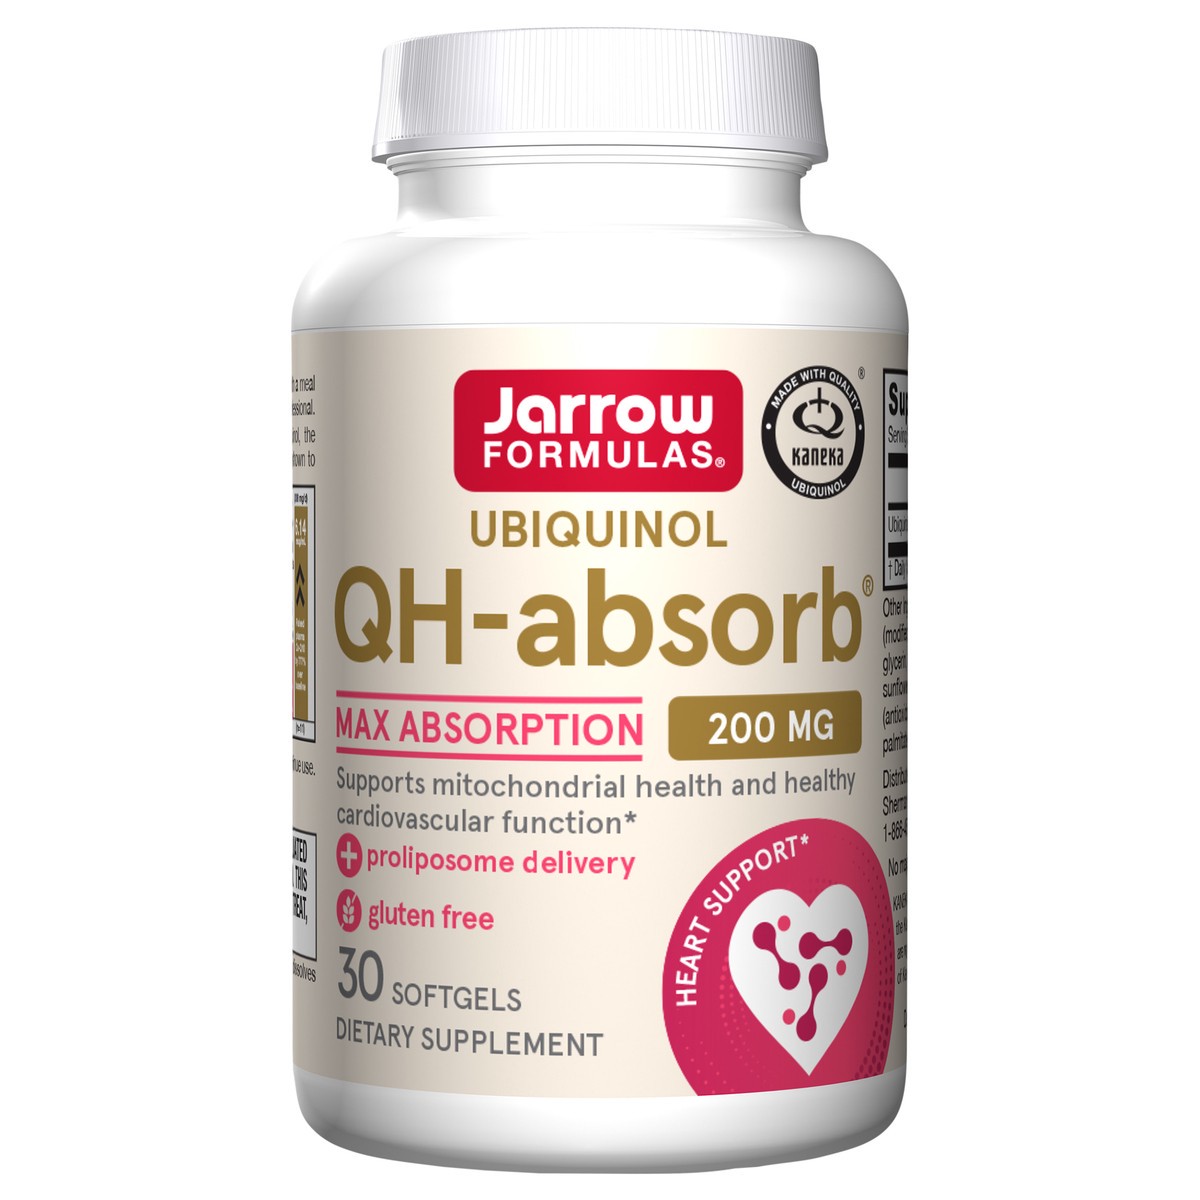 slide 1 of 1, Jarrow Formulas QH-absorb 200 mg - Active Antioxidant Form of Co-Q10 - Dietary Supplement - Supports Mitochondrial Energy Production & Cardiovascular Health - 30 Softgels , 30 ct